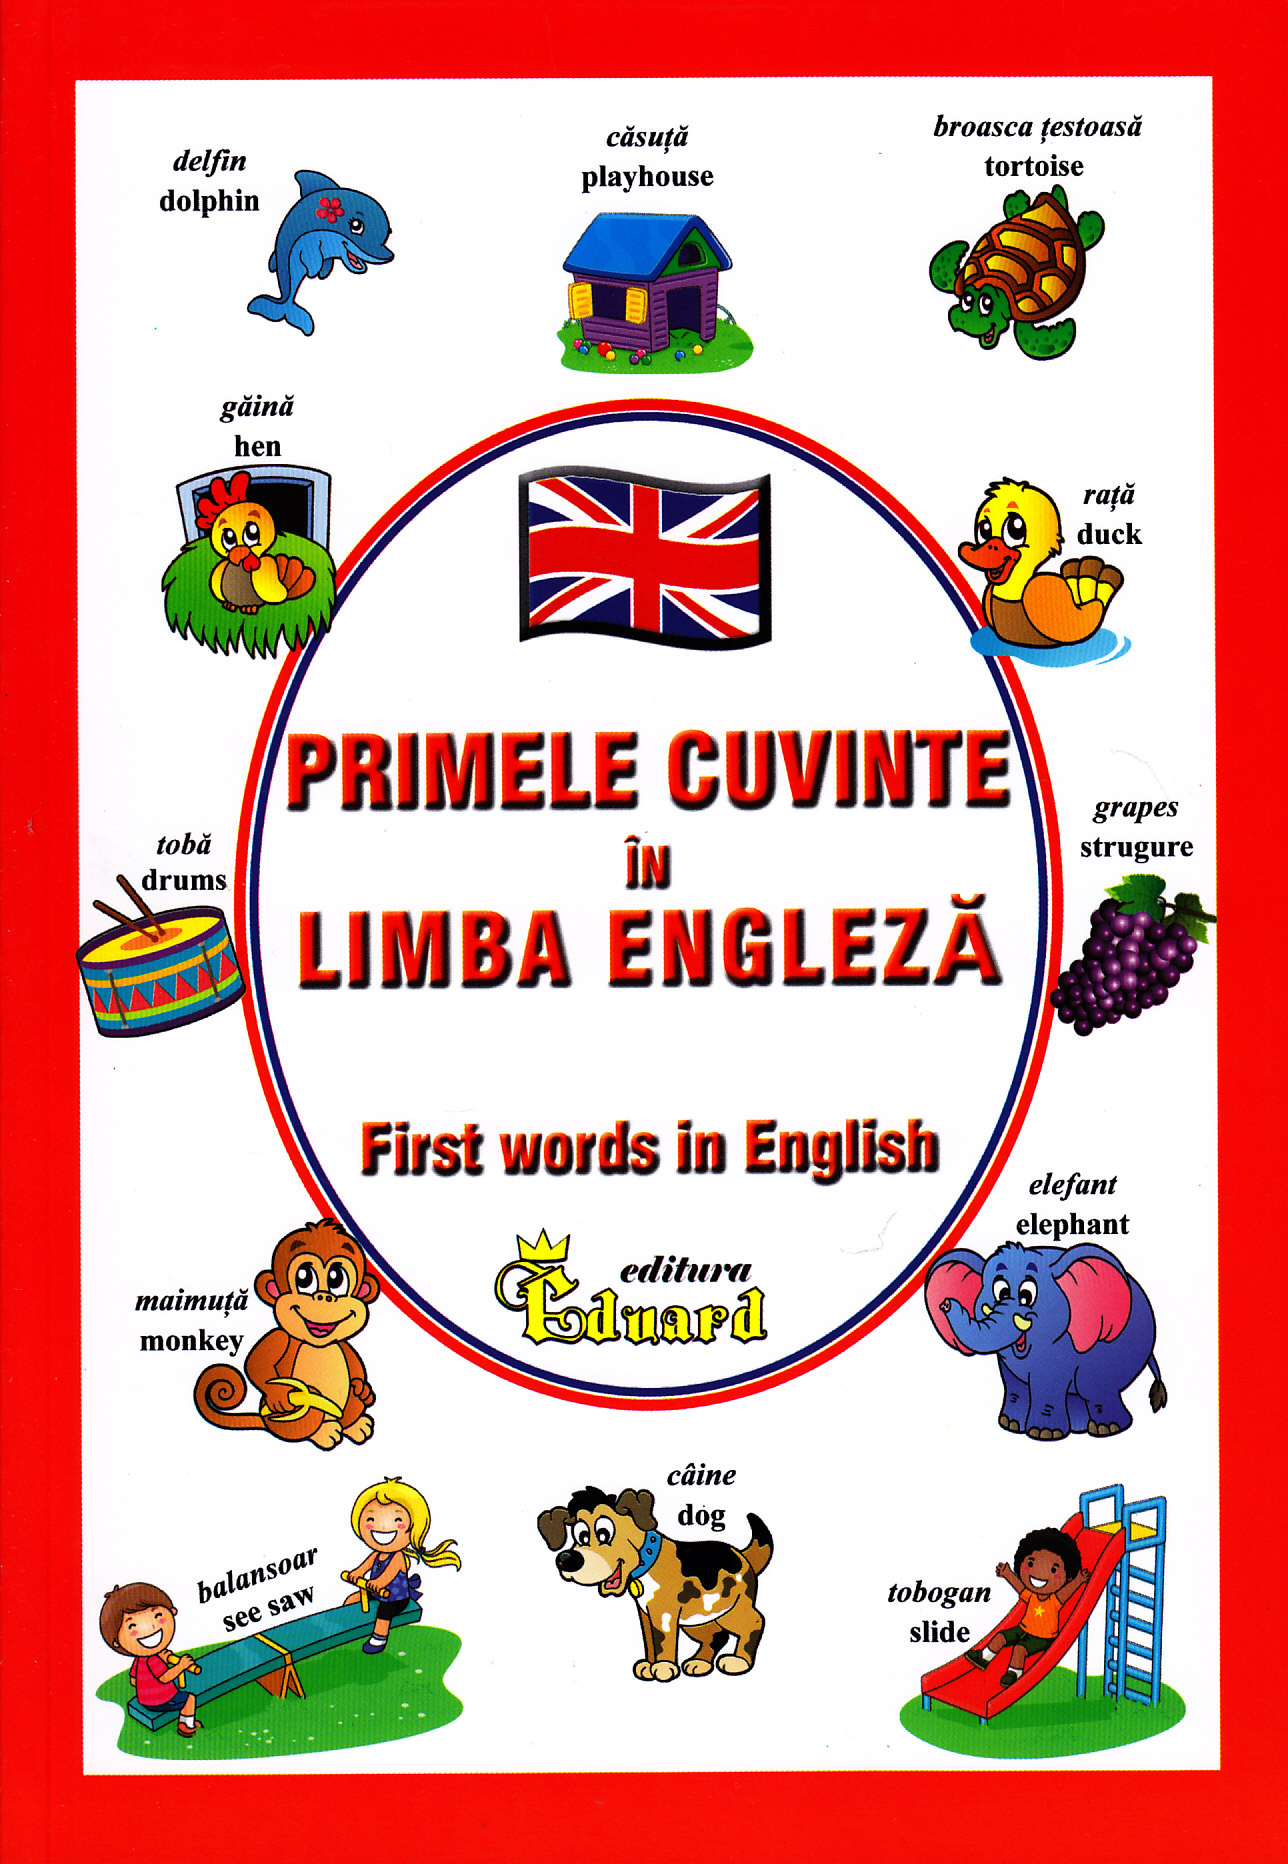 Primele cuvinte in Limba Engleza - First words in English